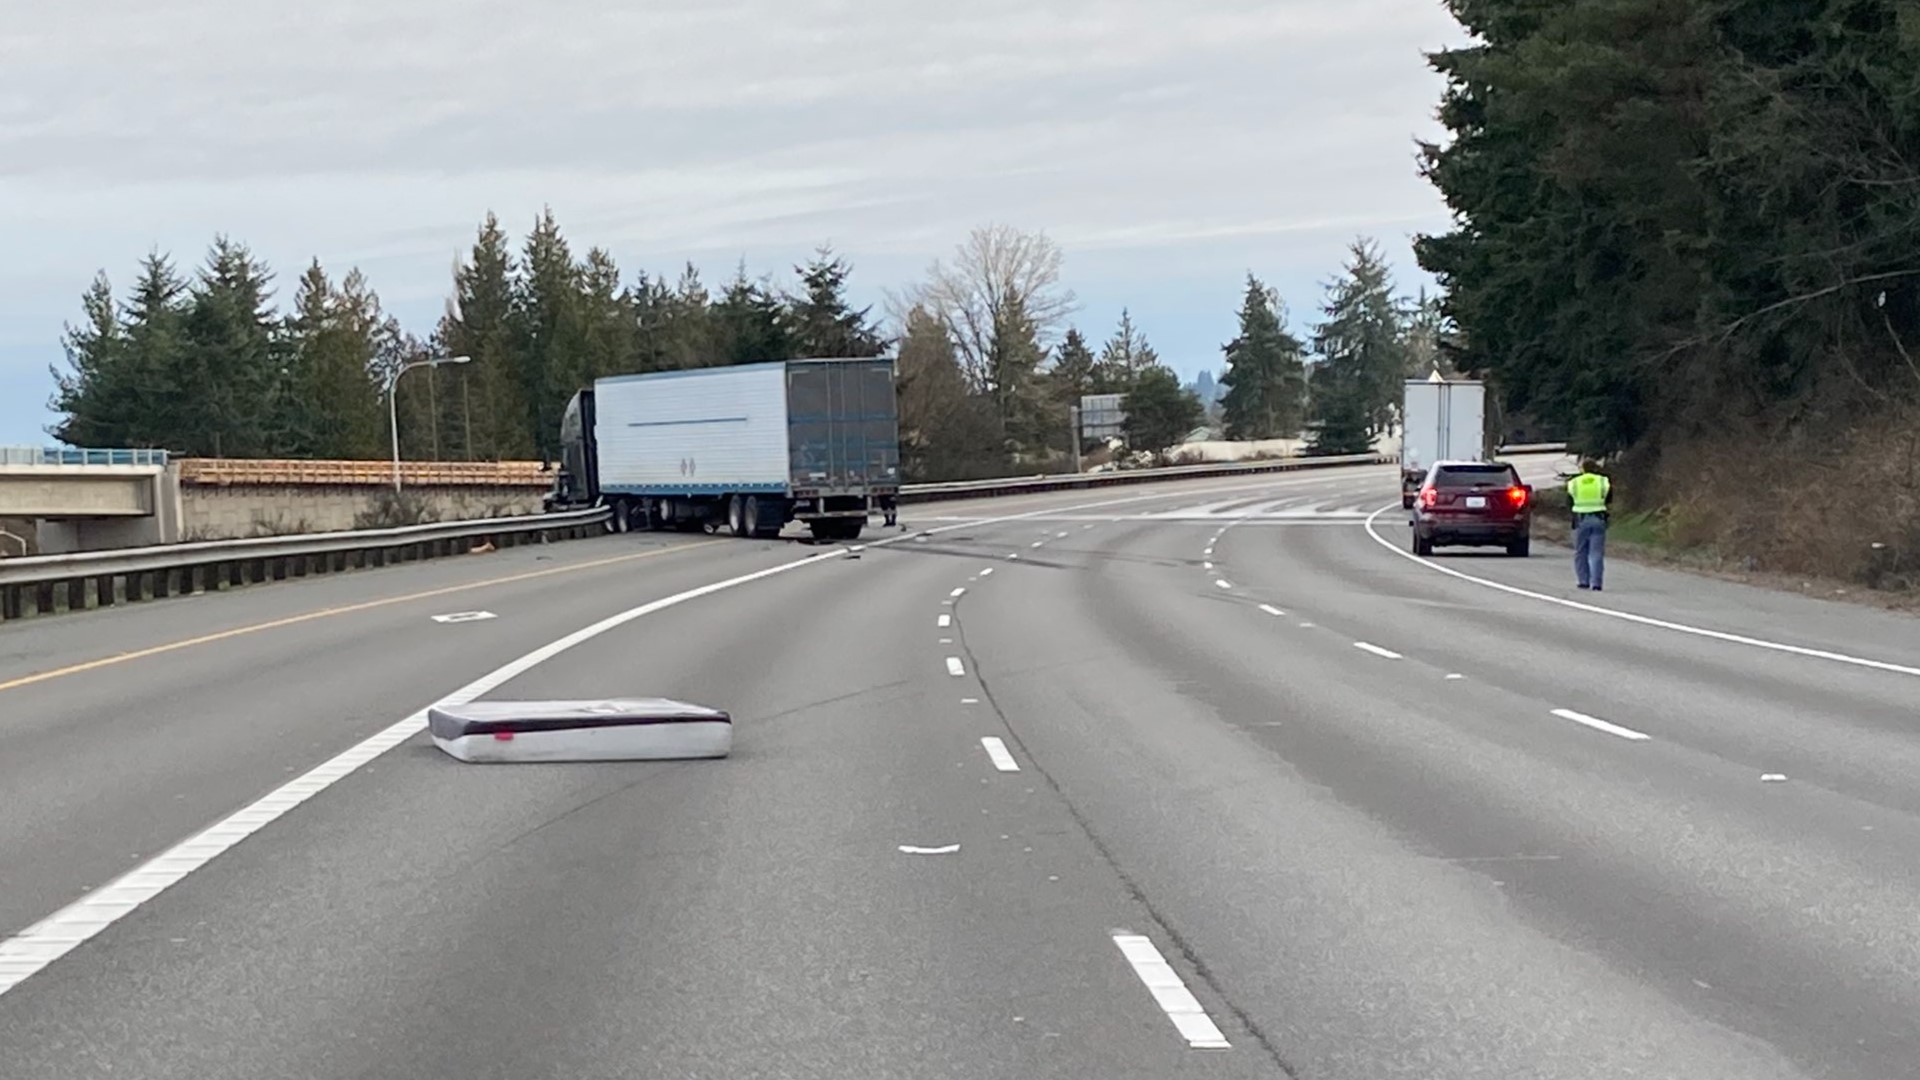 The crash happened around 6:30 a.m. when a mattress fell off a truck, according to the Washington State Patrol.